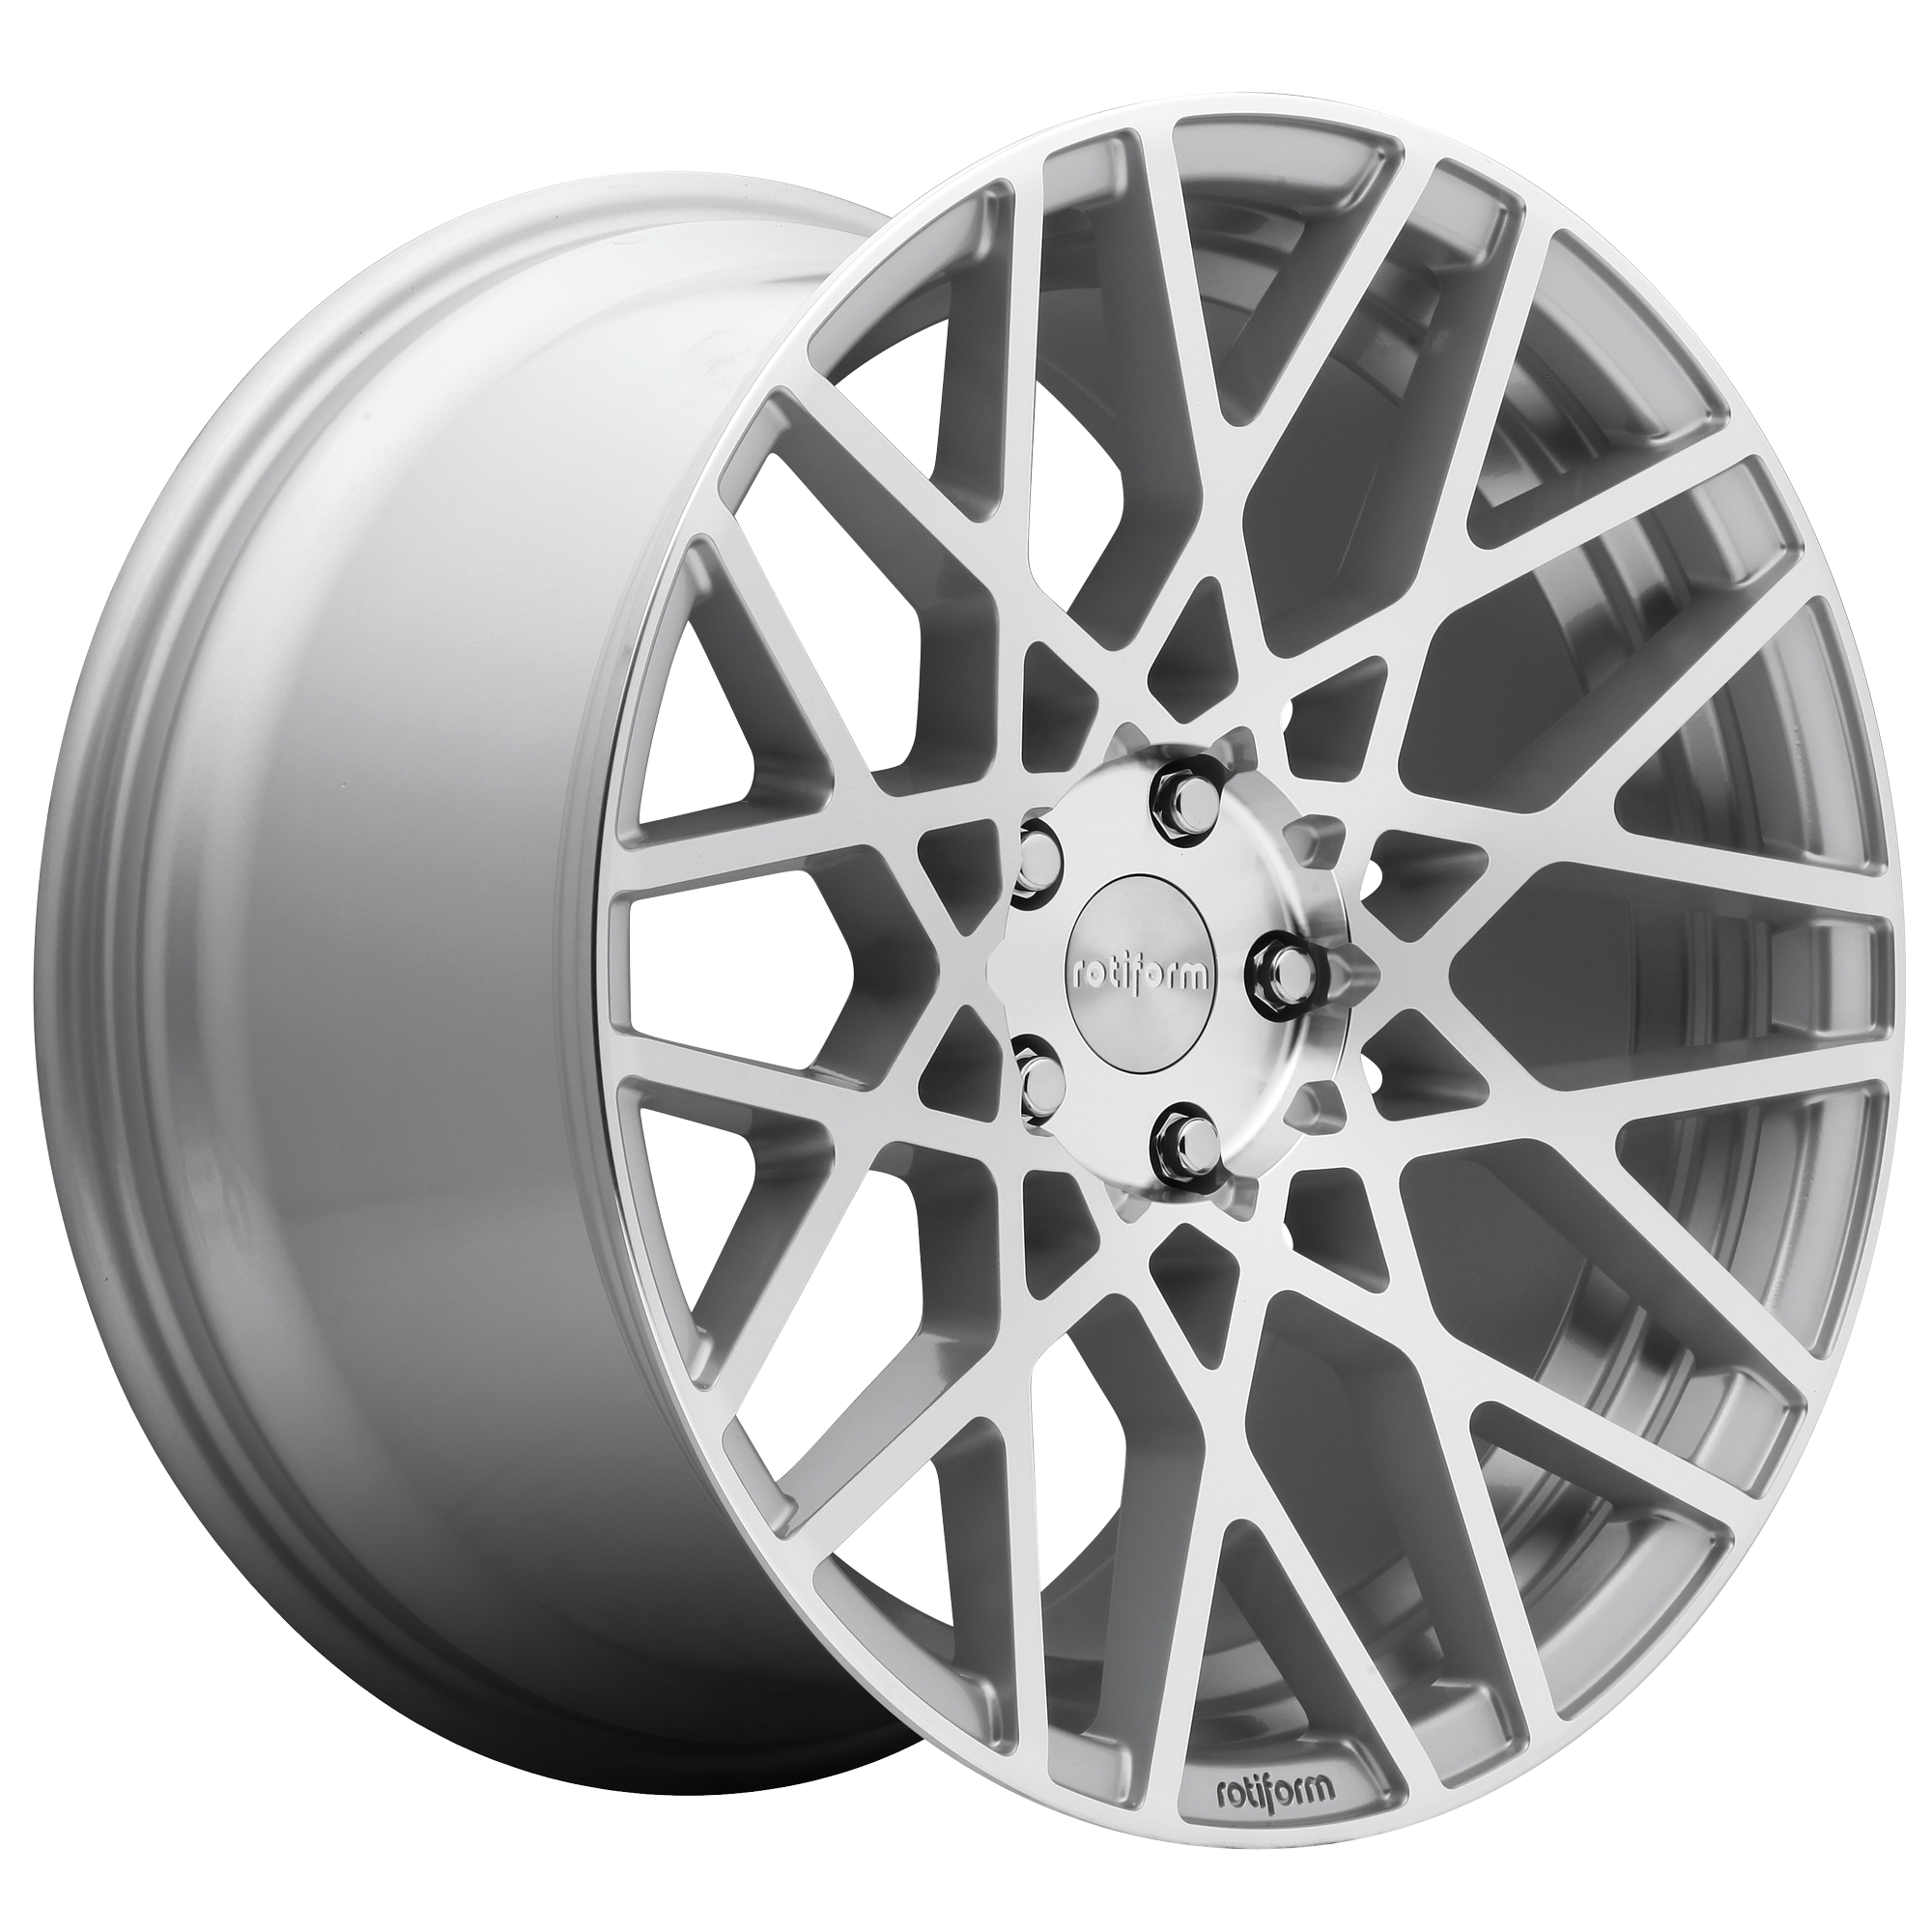 BLQ 19x8.5 5x114.30 GLOSS SILVER MACHINED (38 mm) - Tires and Engine Performance